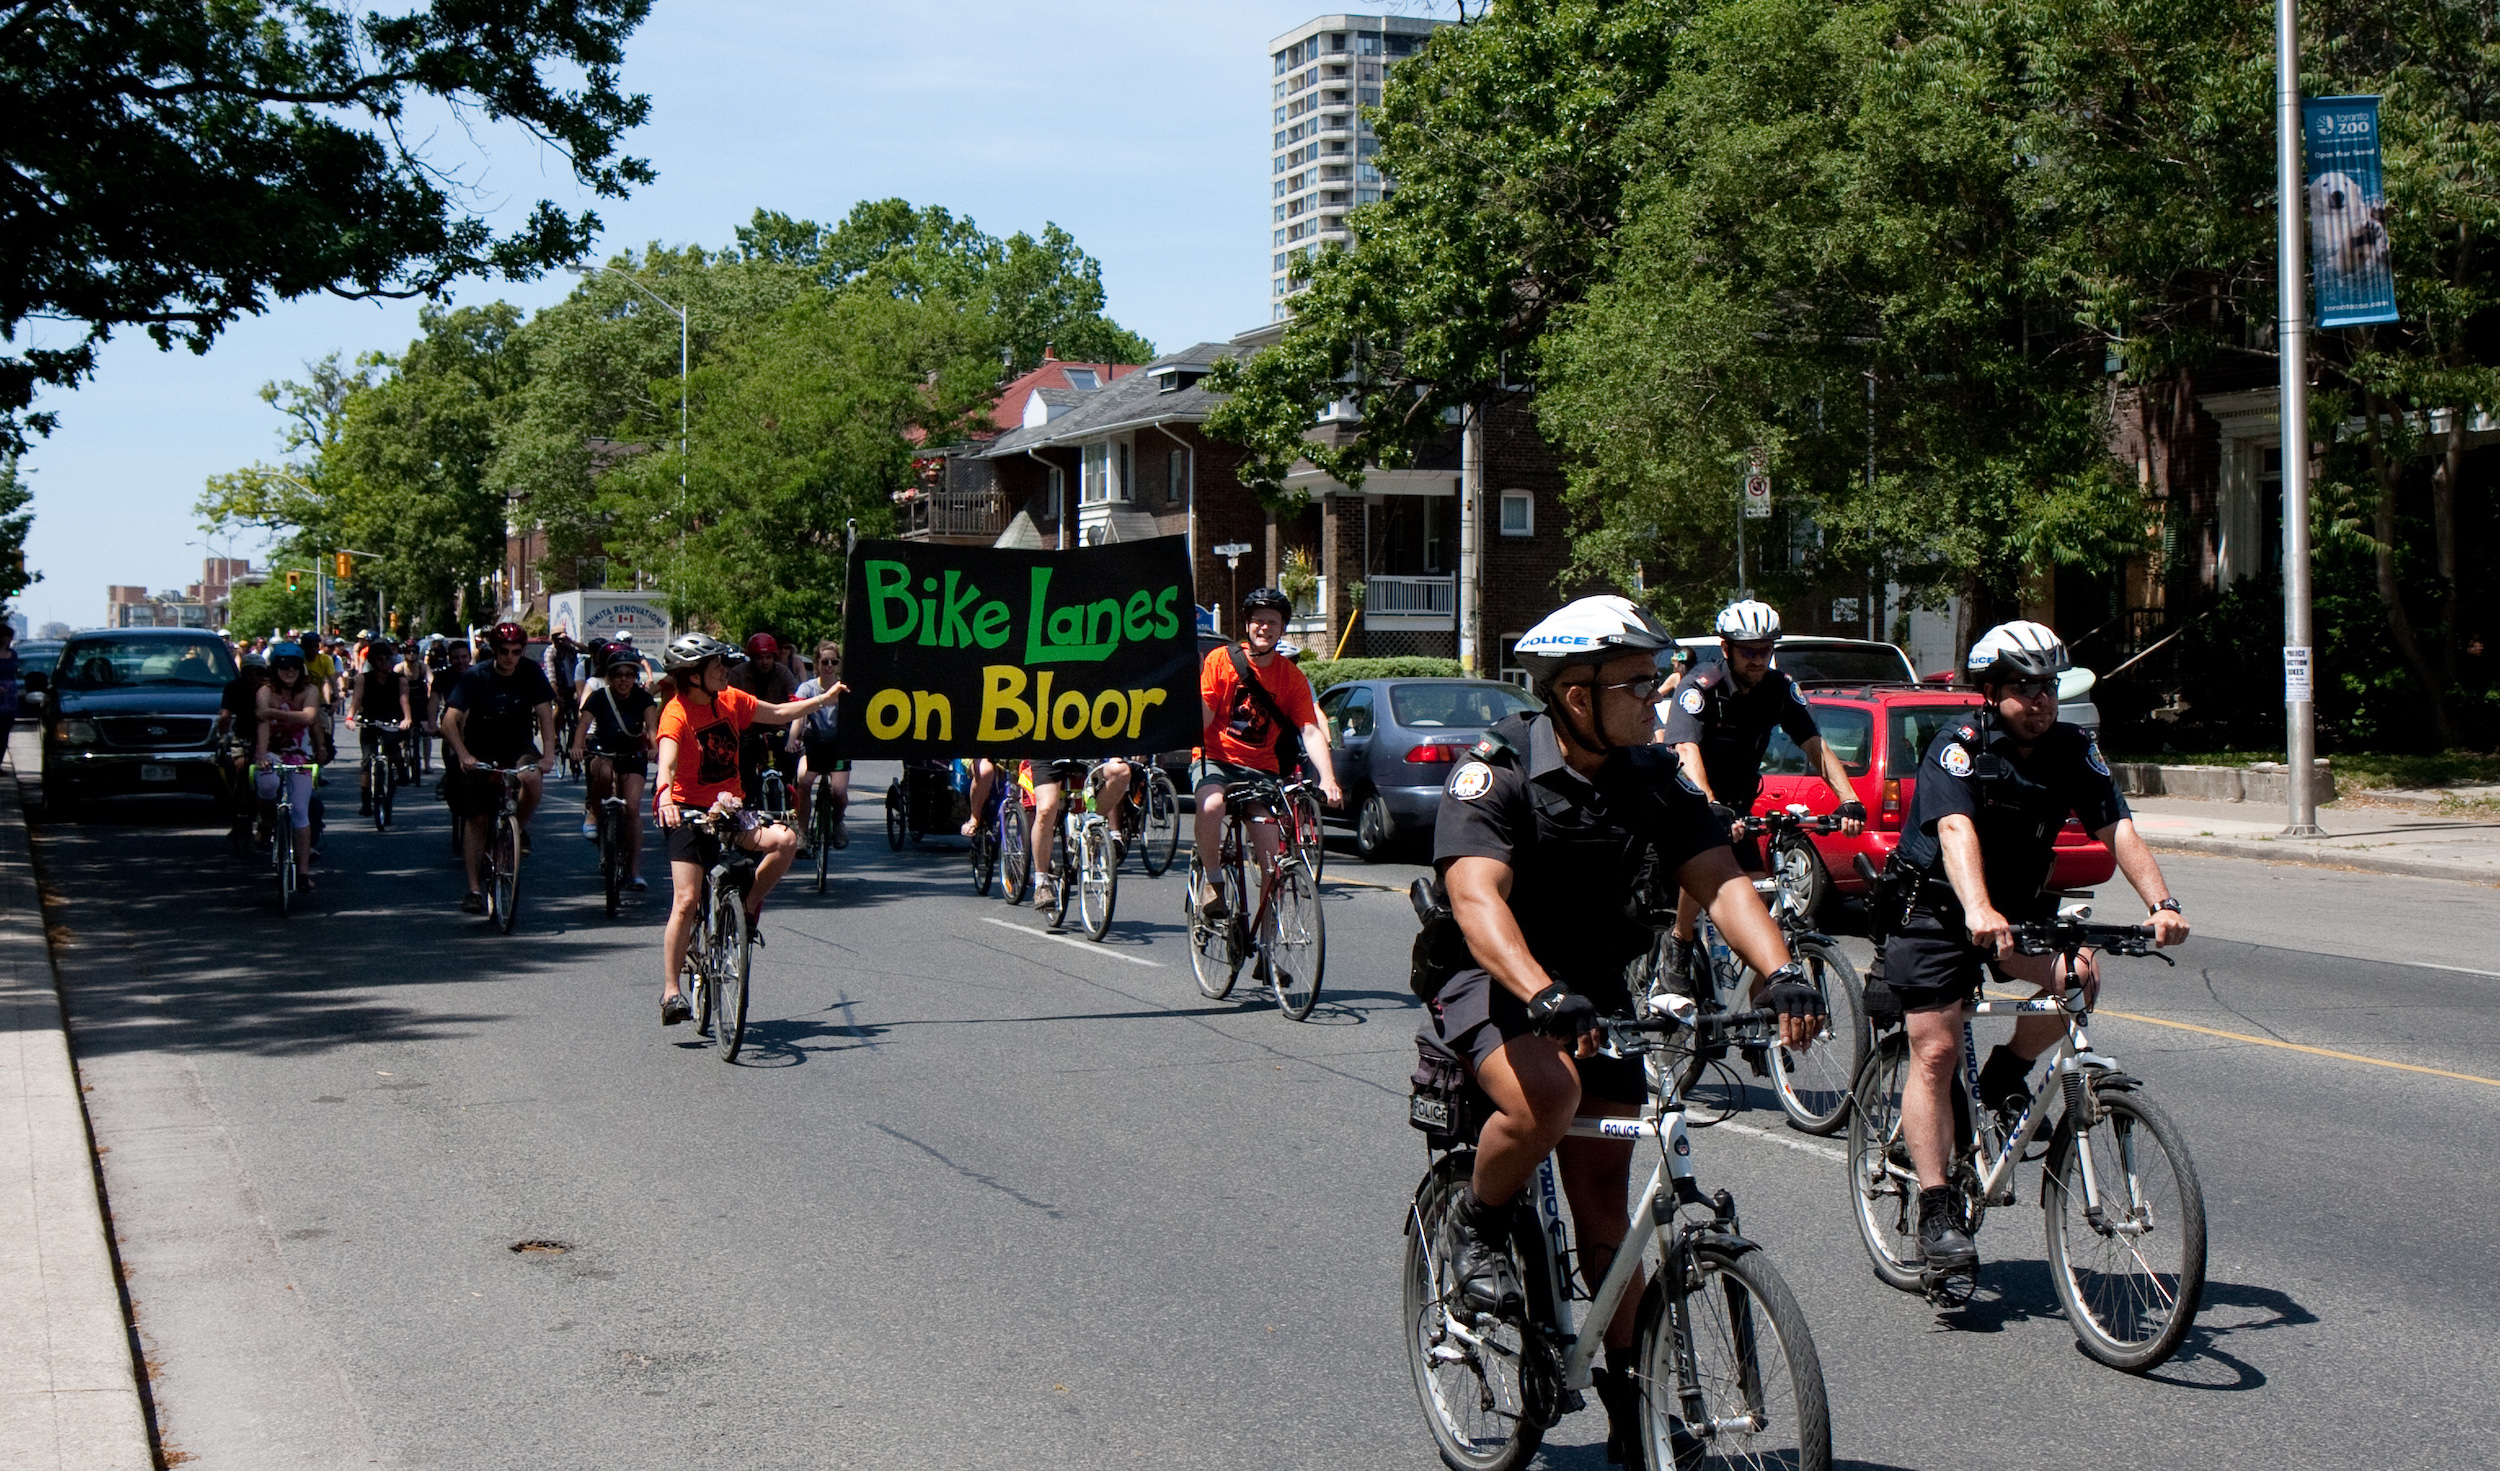 A 2010 photo of cyclists riding to advocate for bike lanes on Bloor Street in Toronto.